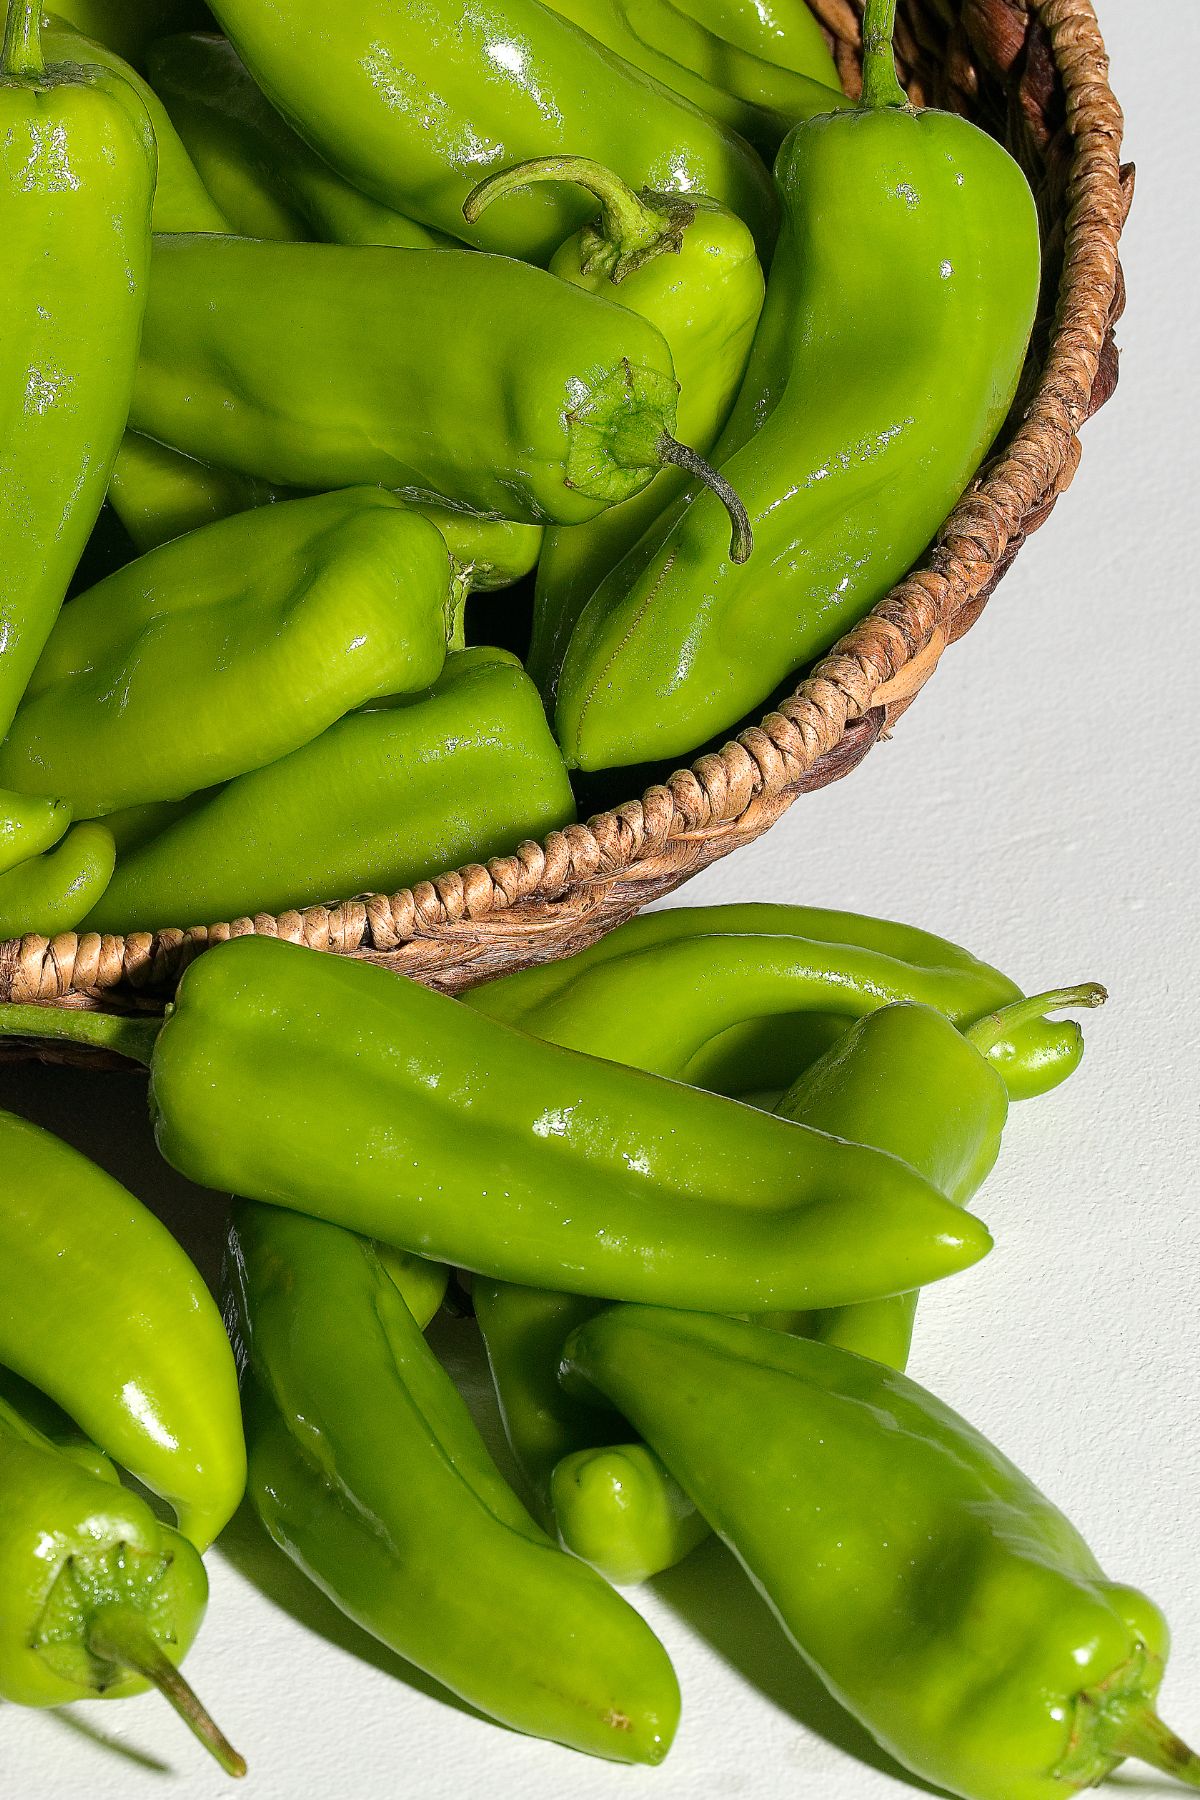 Basket of green chilis on tabletop.